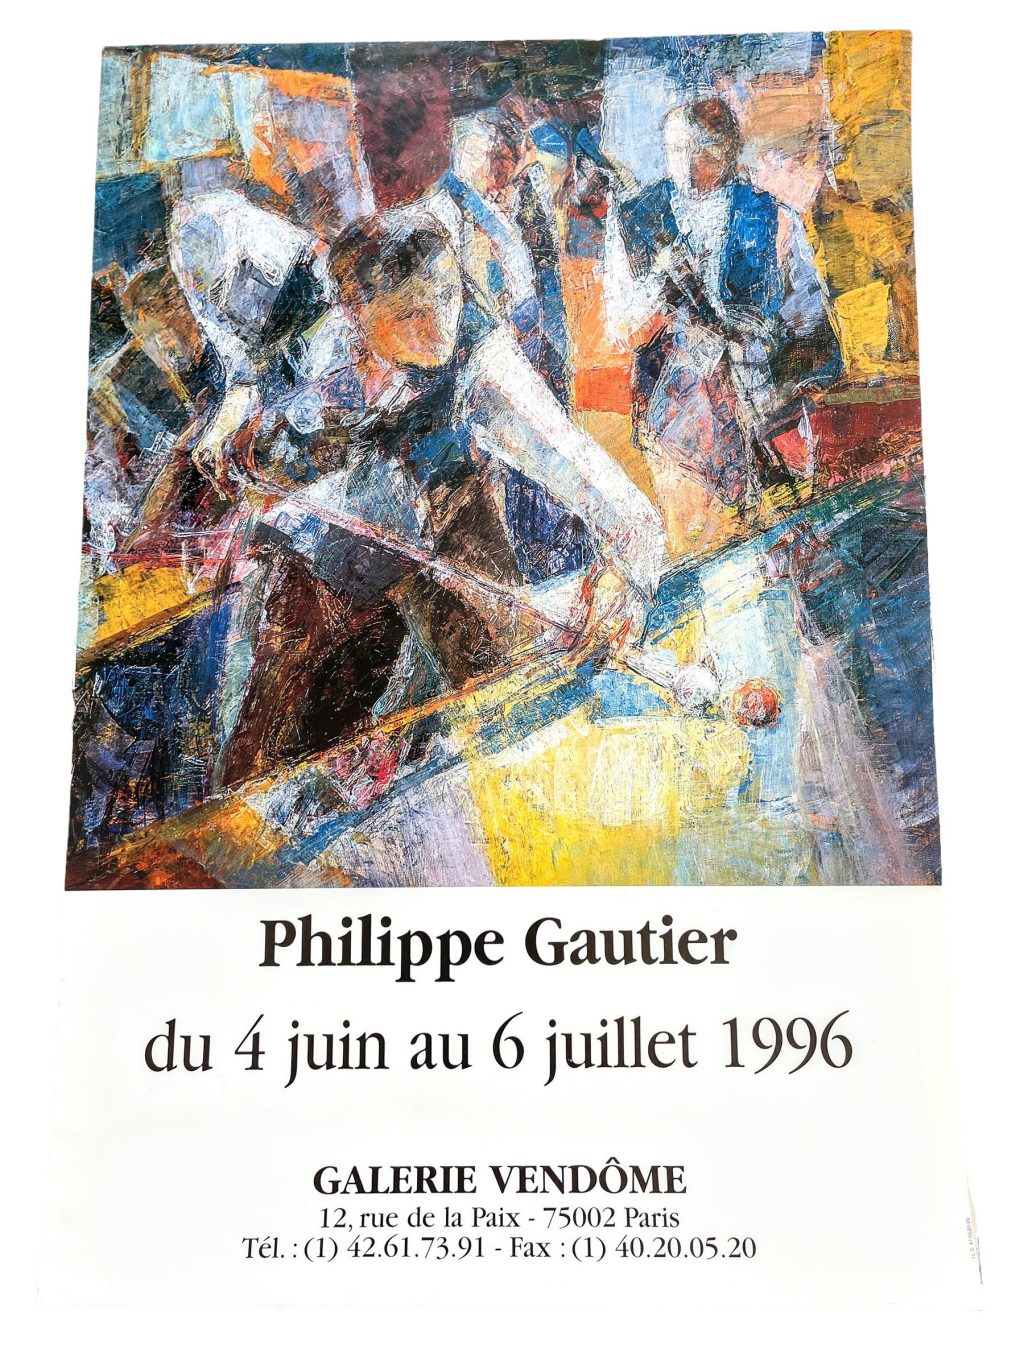 Vintage French Philippe Gautier Galerie Vendome Gallery Original Exhibition Poster Wall Decor Painting Display Artwork c1996 / EVE